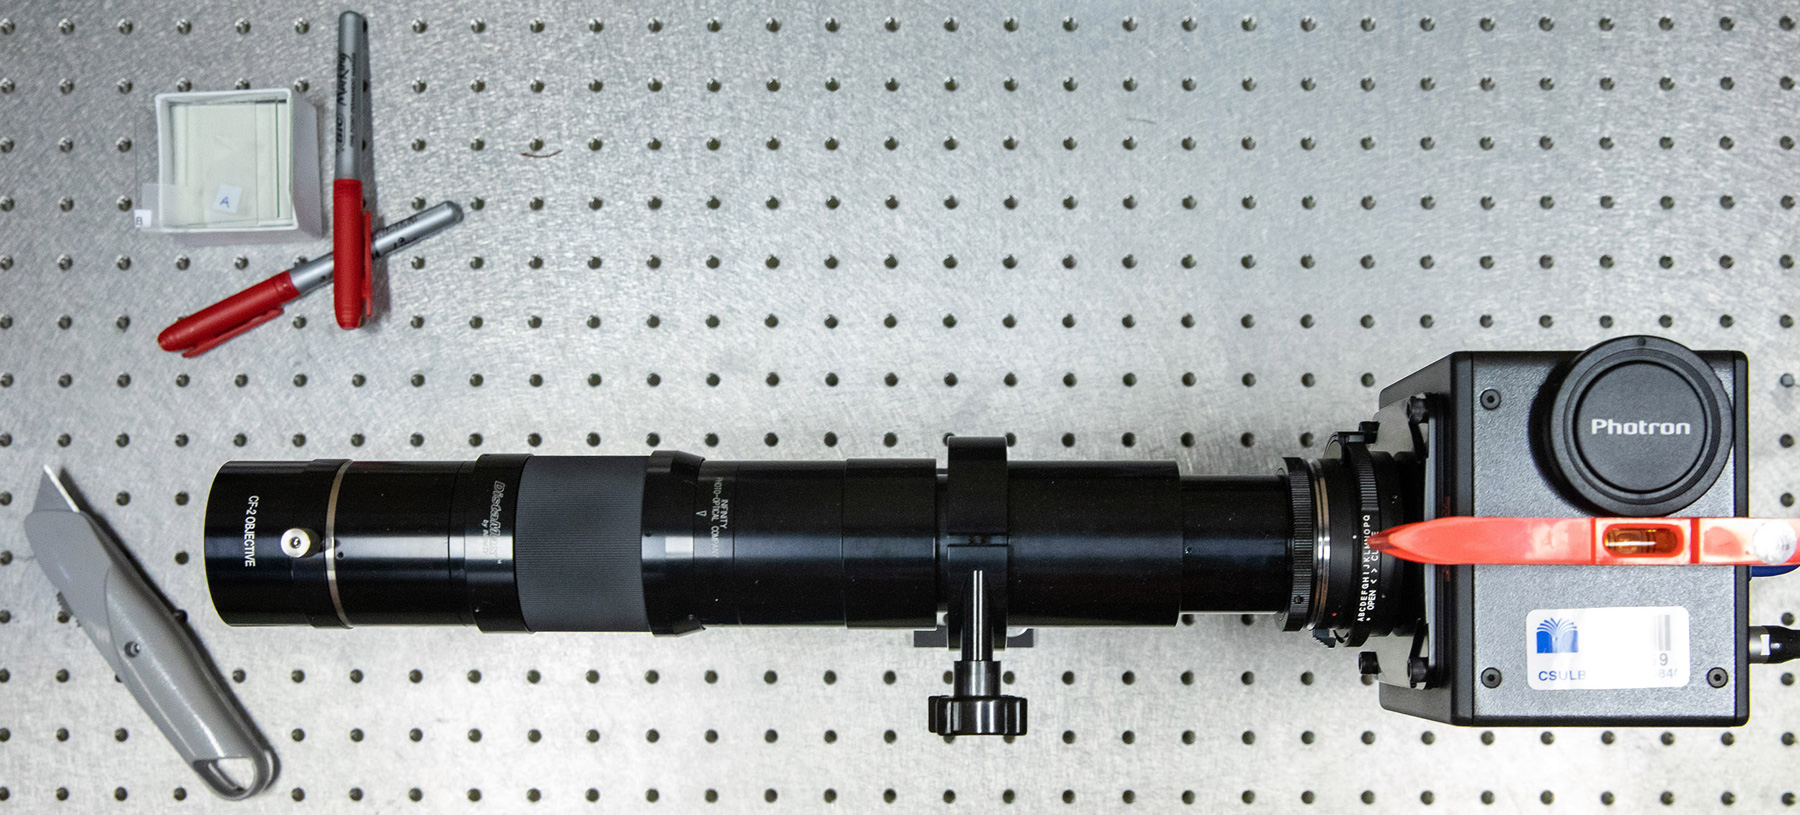 A camera with a long-distance microscope lens used to capture high-speed, high-resolution video for data analysis.